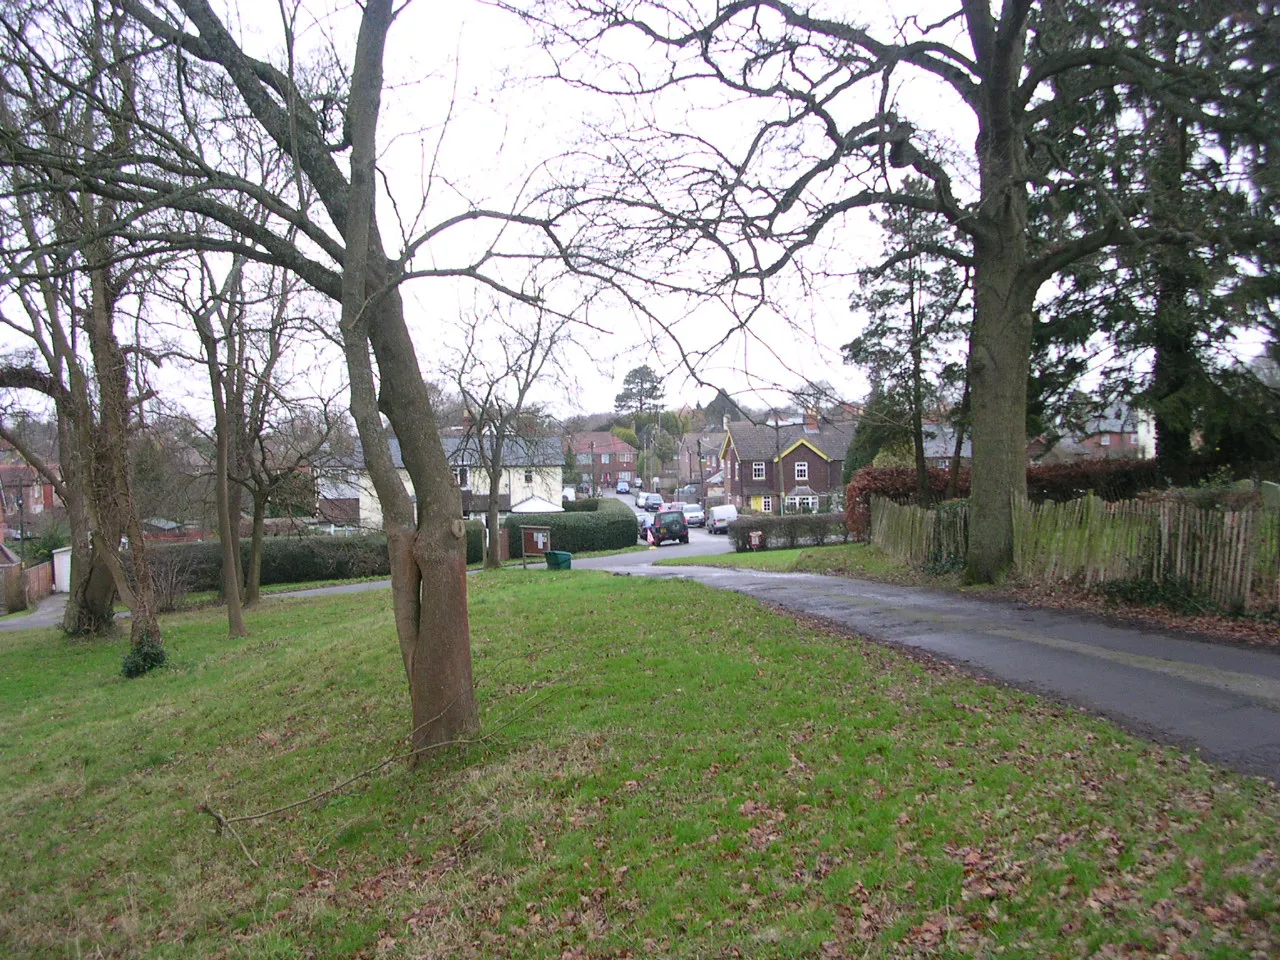 Photo showing: South Holmwood, Surrey, England seen from near the church.